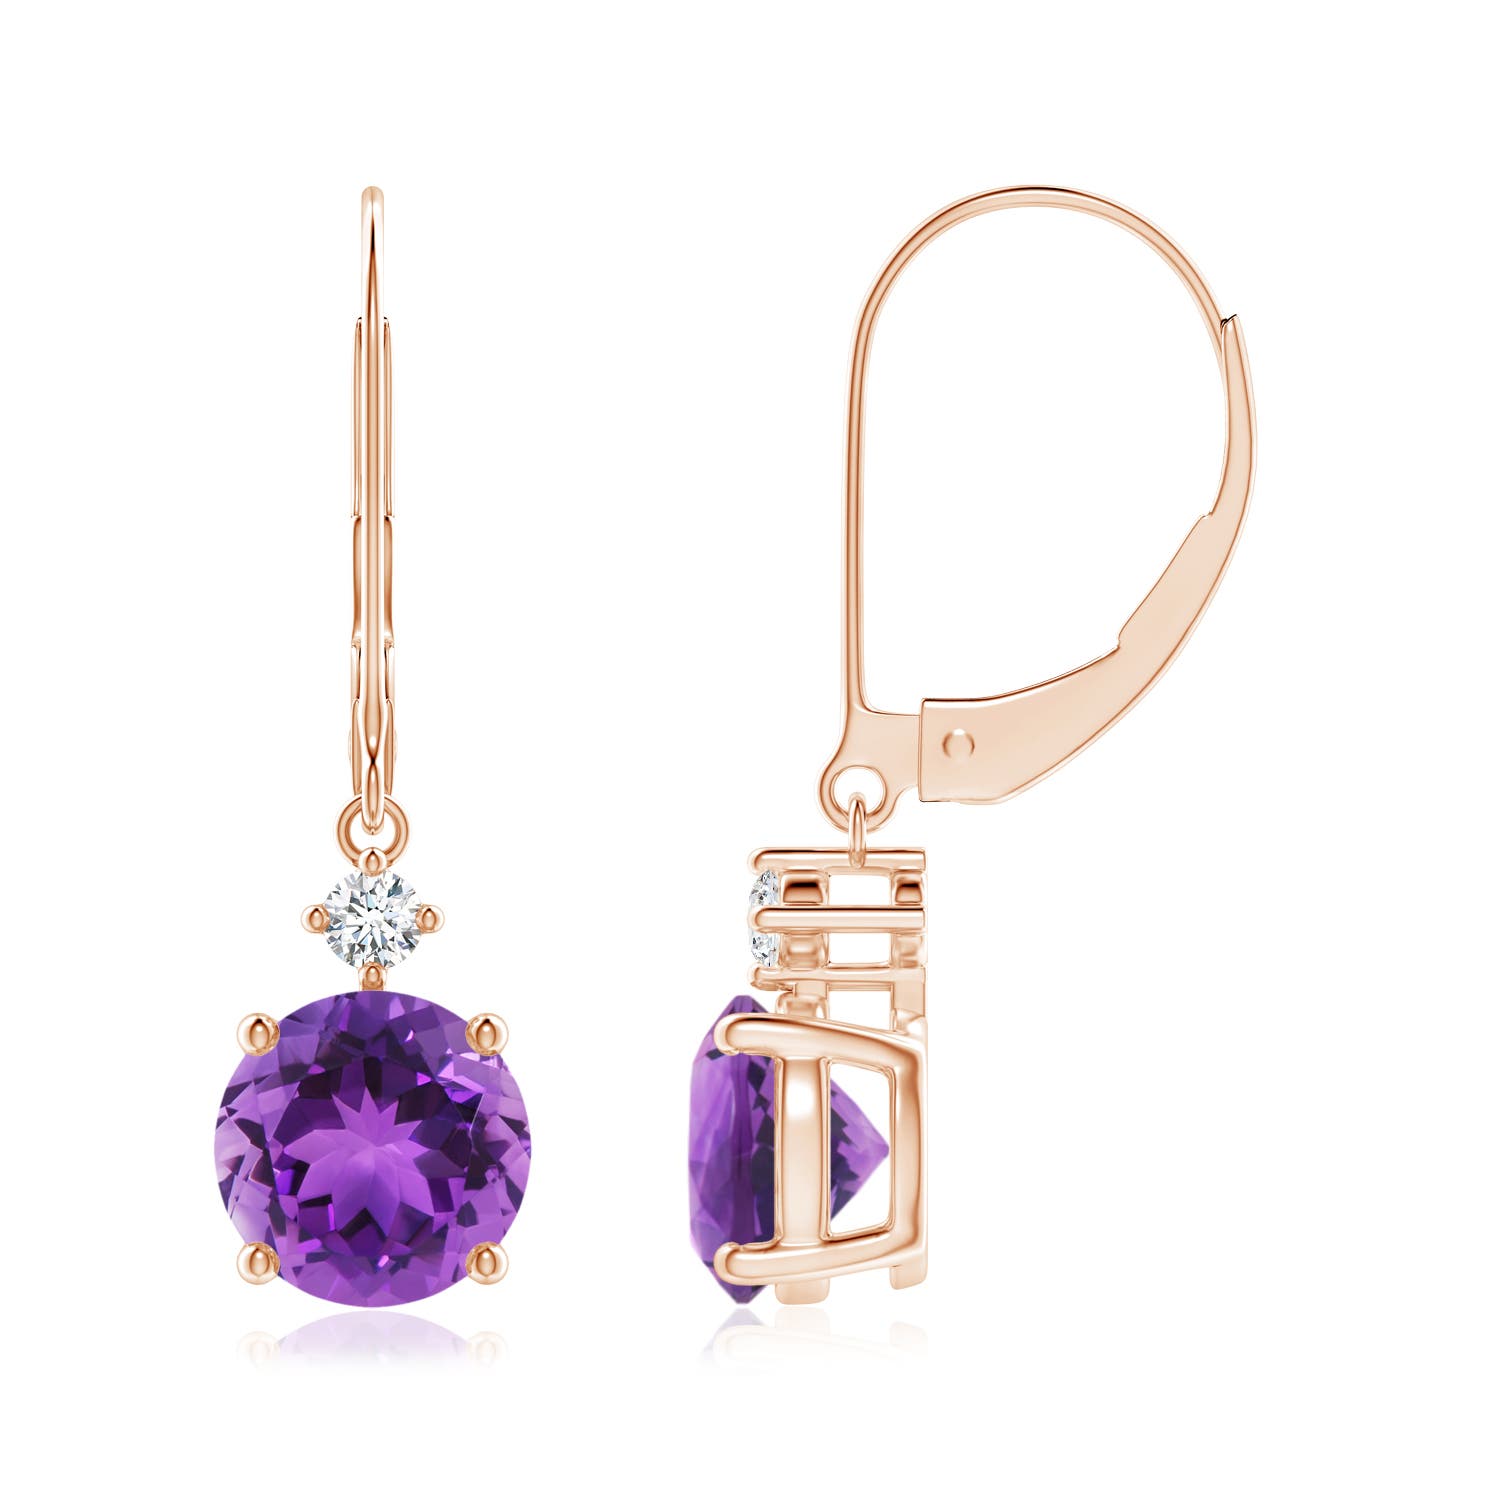 AAA - Amethyst / 2.39 CT / 14 KT Rose Gold